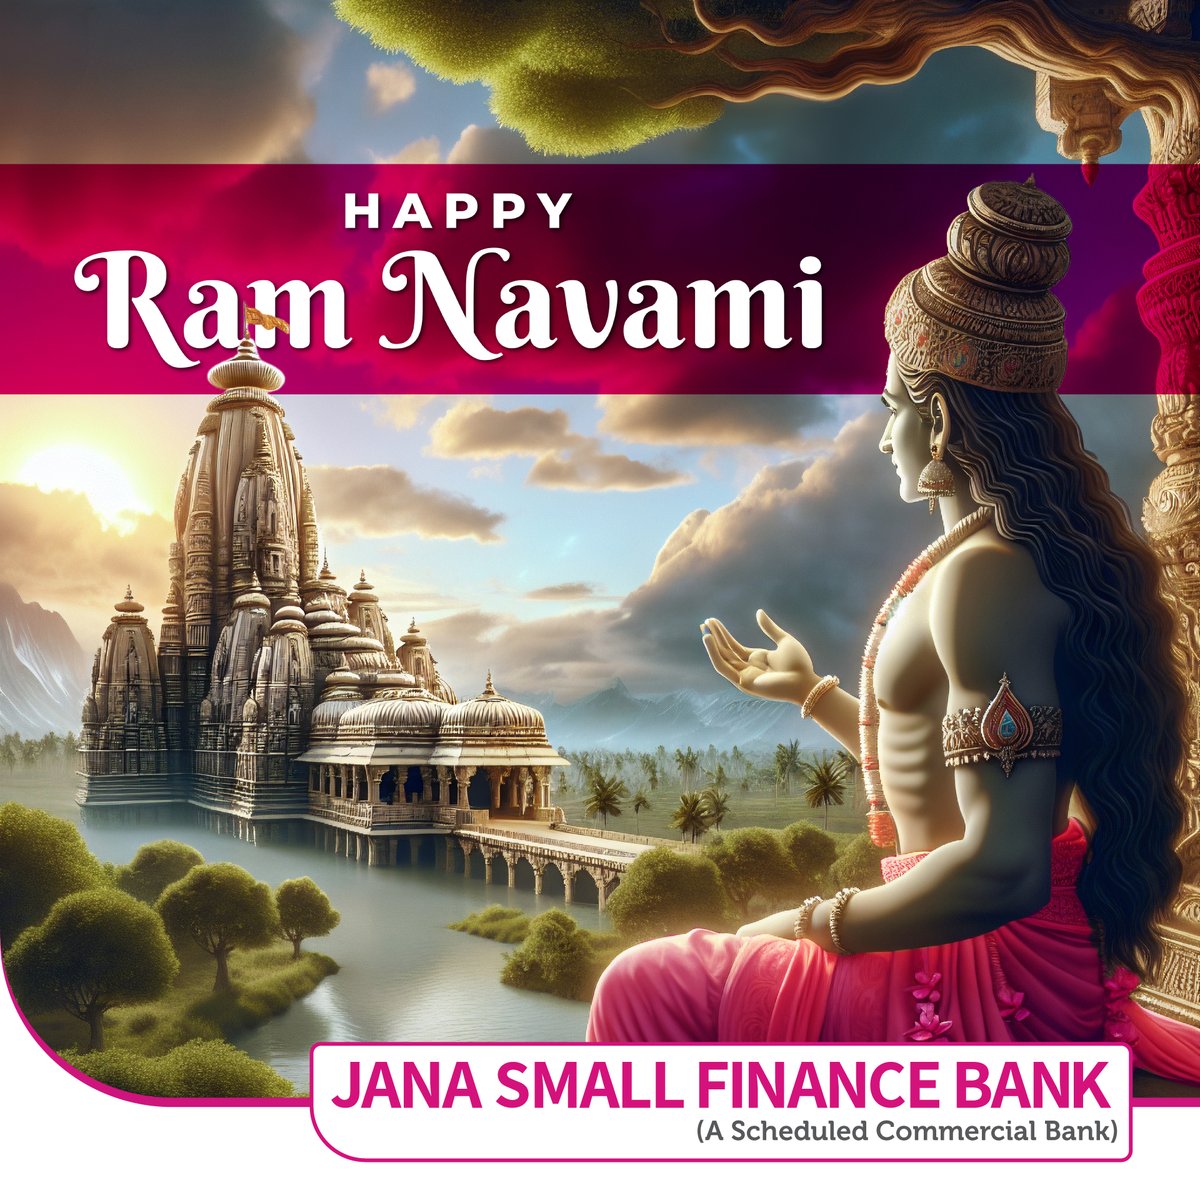 May the divine grace of Lord Ram fill your life with happiness, peace, and prosperity. Happy Ram Navami to all! #RamNavami #janabank #JaiShreeRam